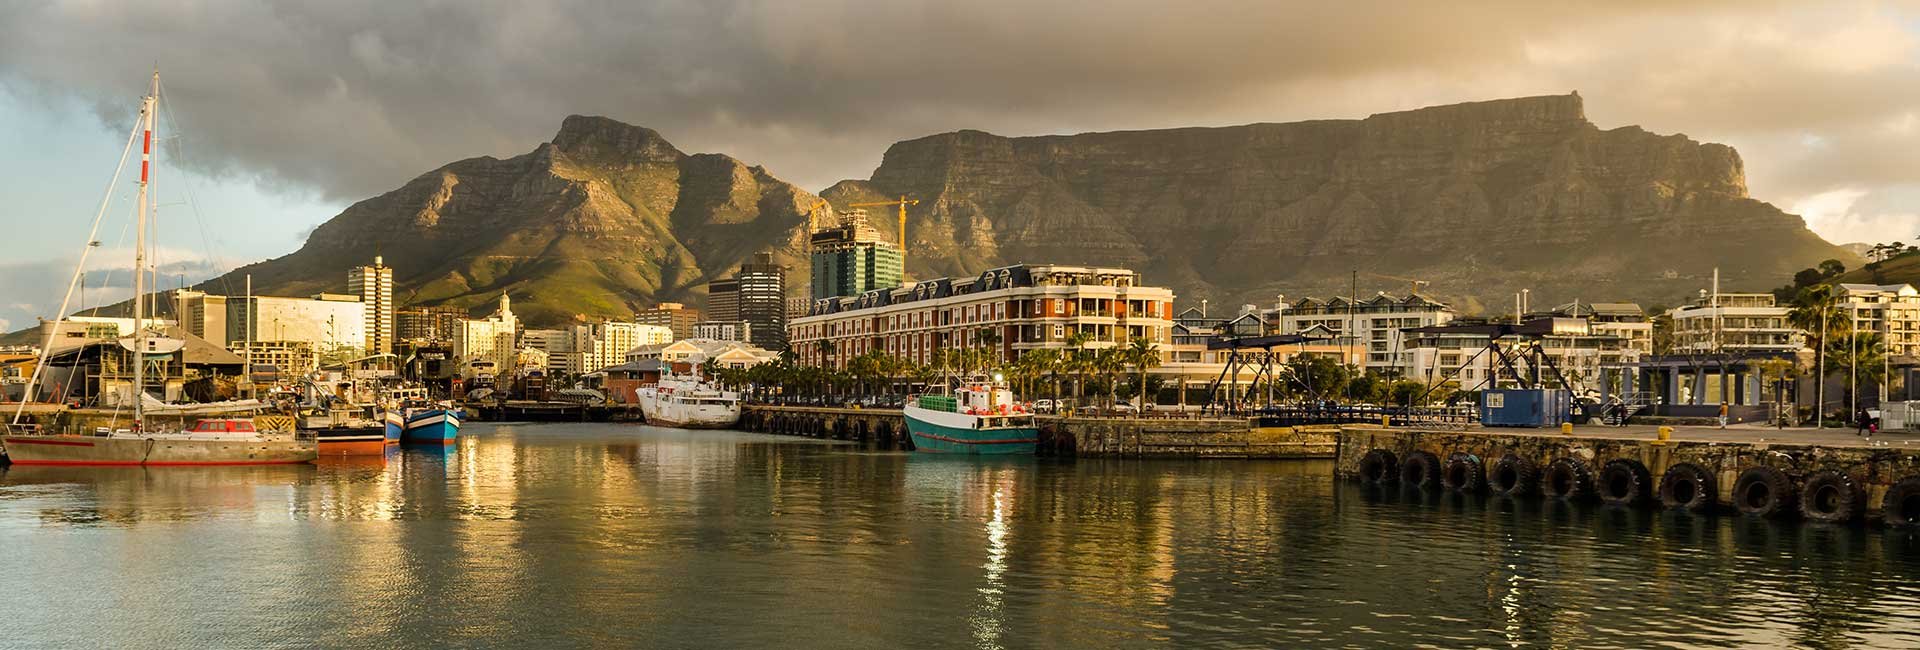 cape town waterfront